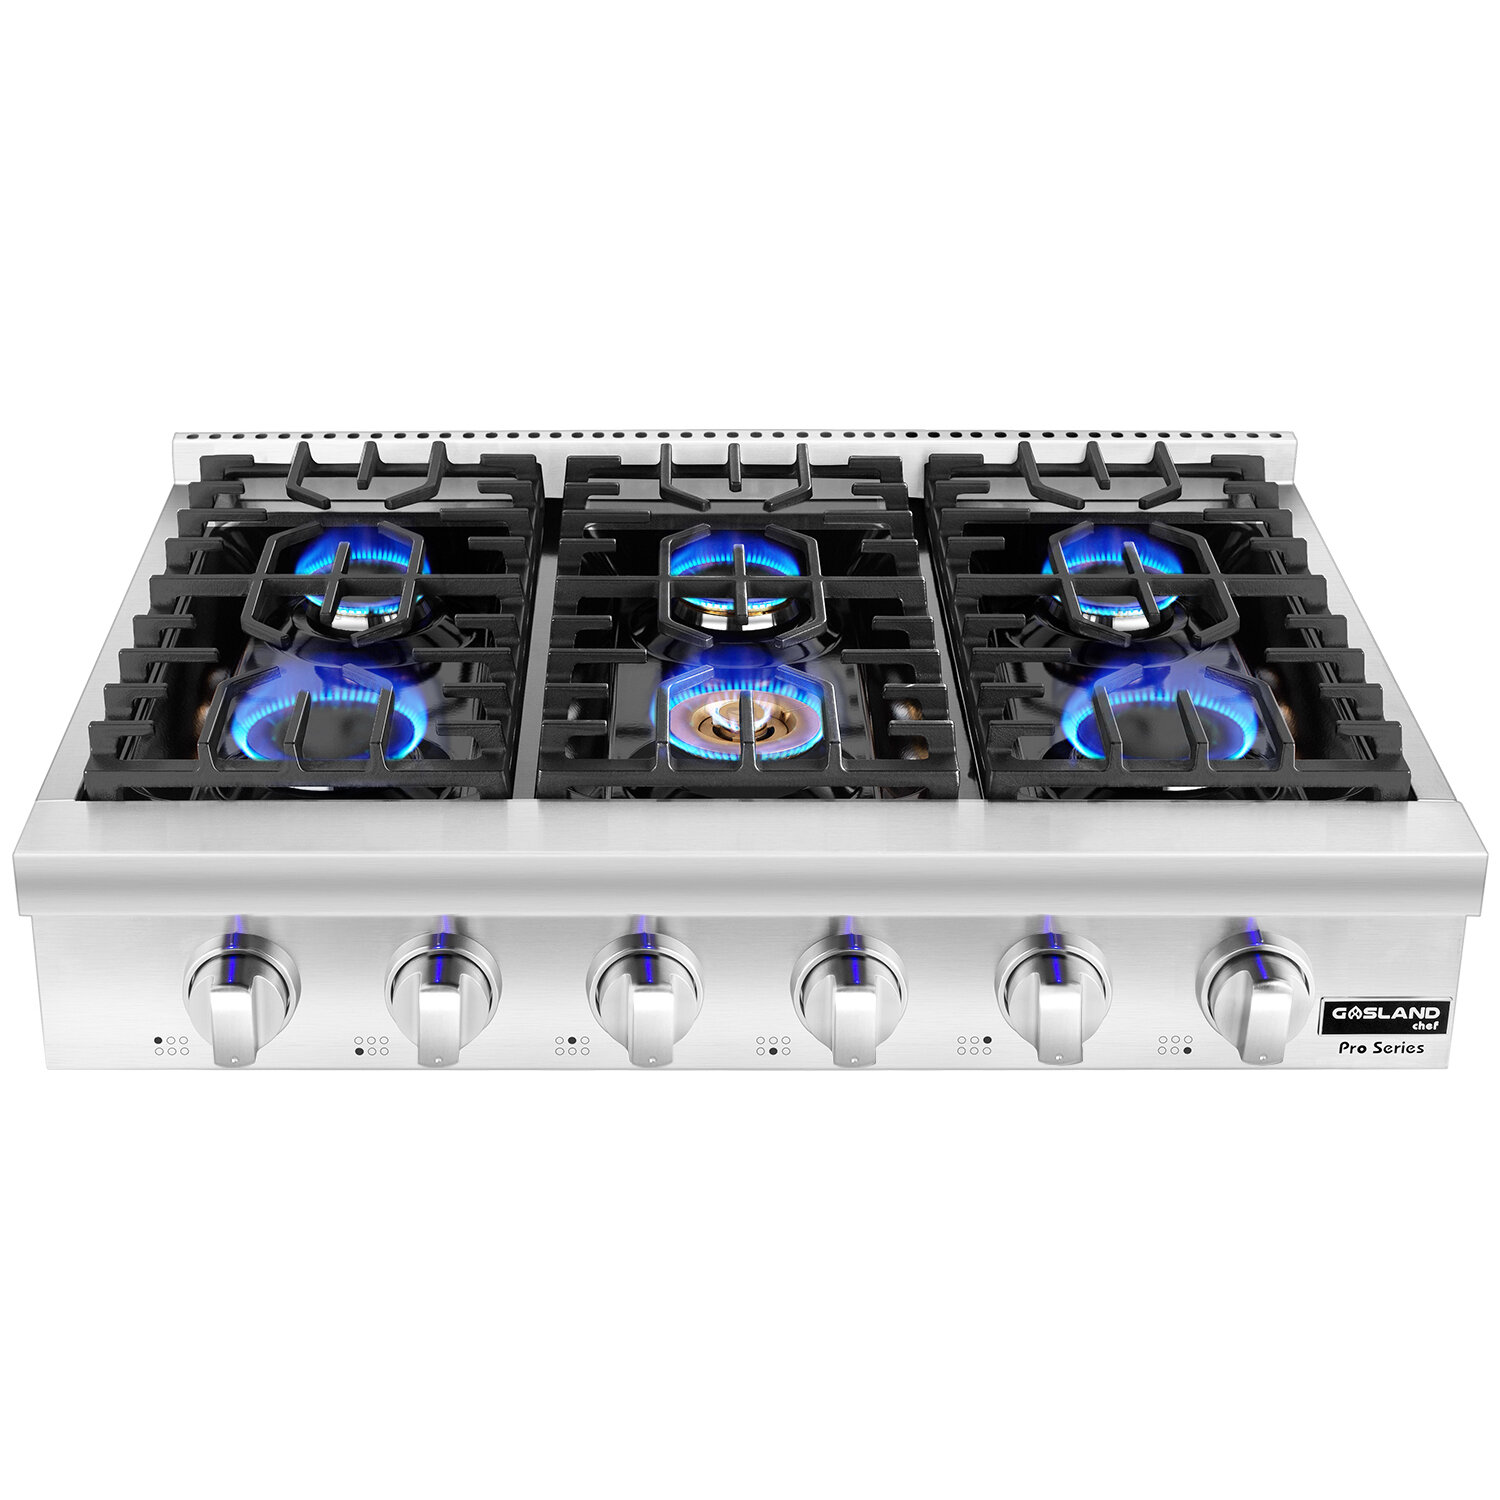 Gasland Chef 36 inch 5 Burner GAS Cooktop with Reversible Cast Iron Grill/Griddle, NG/LPG Convertible, Silver